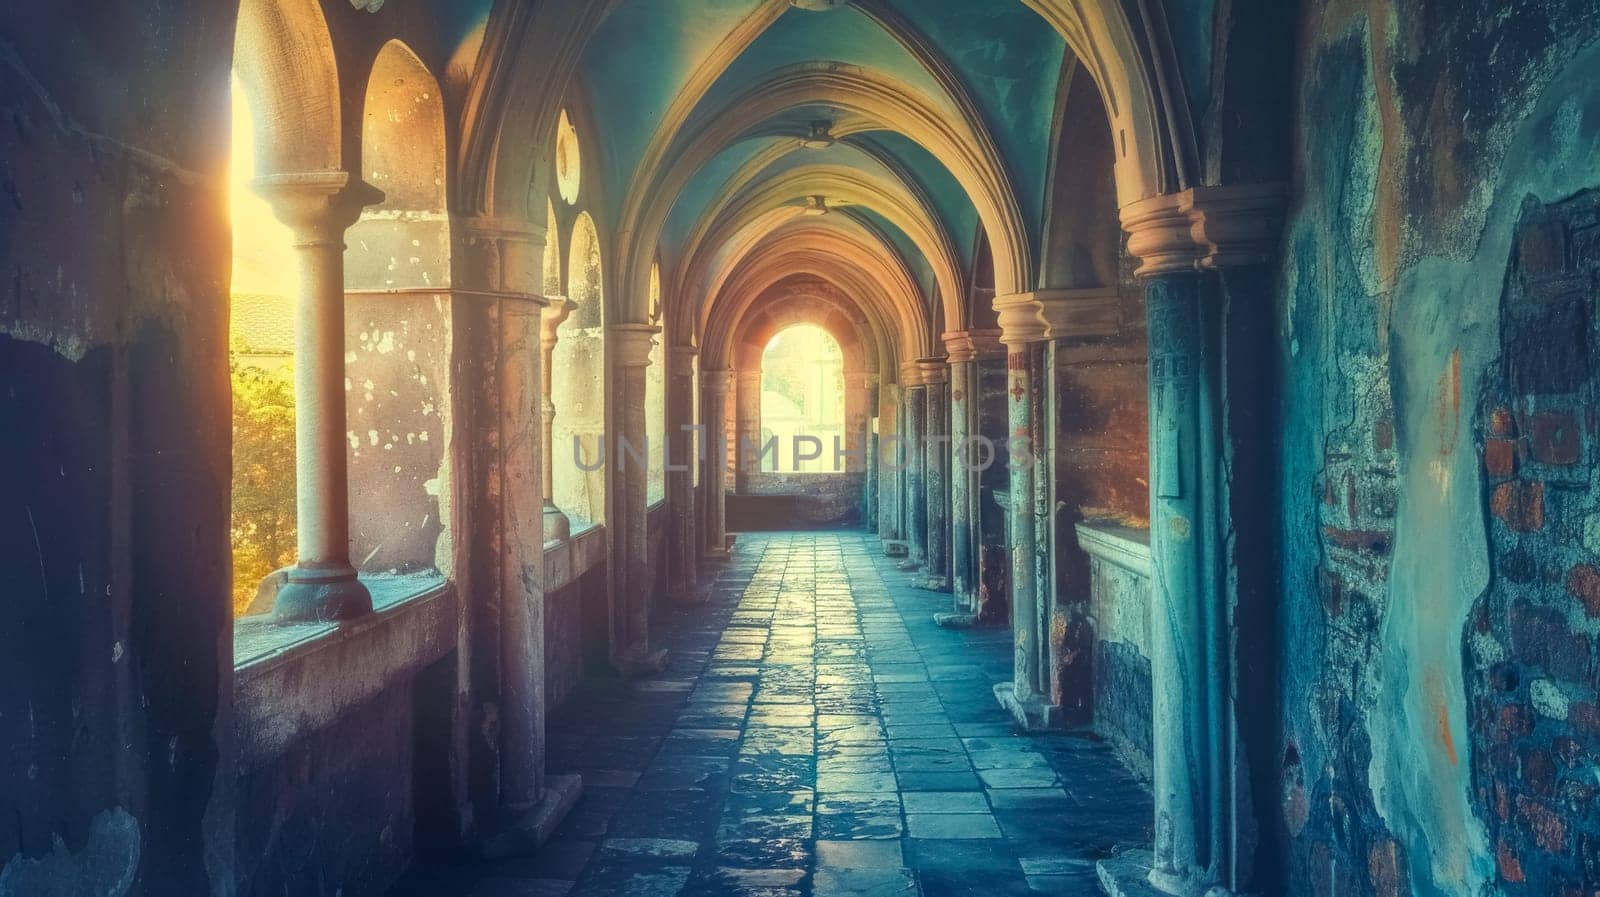 Enchanted medieval cloister in sunset light by Edophoto